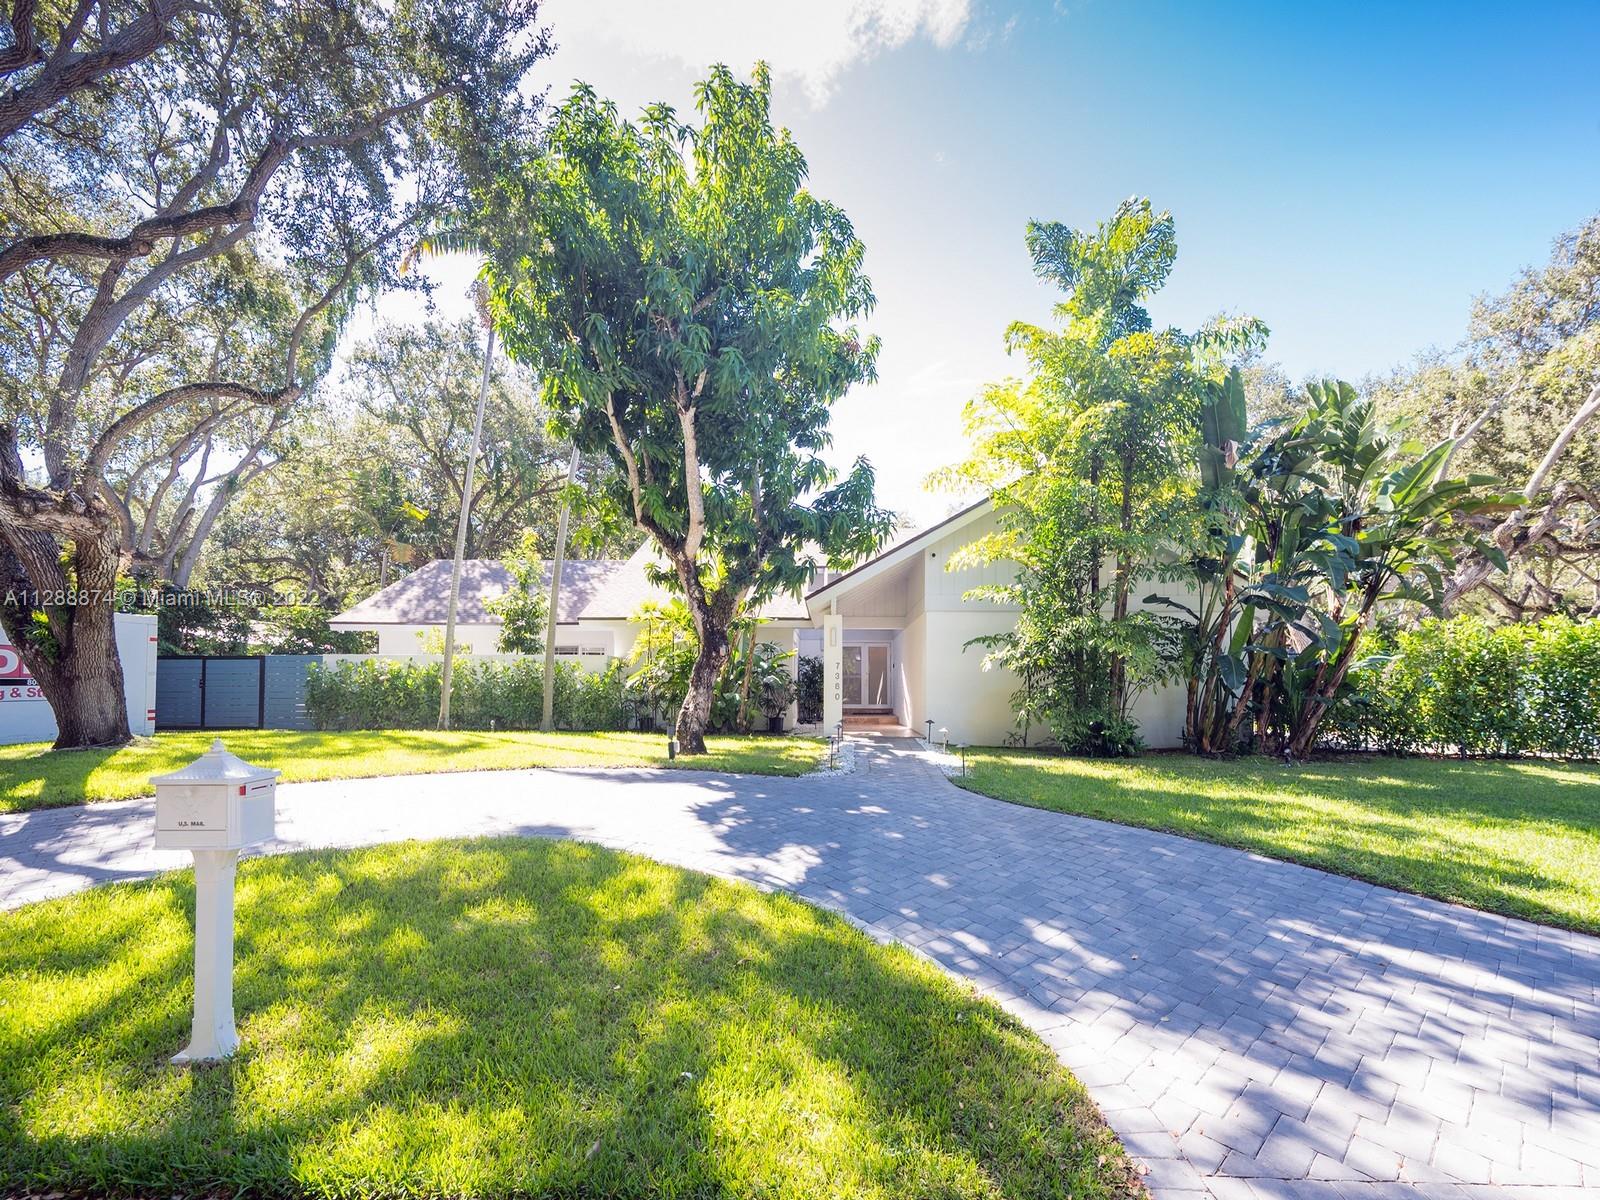 SMART home 1 block away from Old Cutler Rd. Rent this gorgeous remodeled 4 bdm 2 1/2 bath corner lot home on a 16,800sqft lot. Enjoy the open floor plan w/soaring vaulted ceilings, custom design kitchen w/13ft waterfall island overlooking pool & backyard. Built-in dry bar & buffet table w/elegant dining area. Enjoy one of a kind loft office area w/glass panels w/views to the living room & pool. Comes w/a beautiful screened in heated pool & spacious backyard where you can entertain, enjoy &/or relax. Features a fully equipped gym, impact windows/doors, sec system, 2 driveways, gated property & more. Comes partially furnished from Restoration Hardware, including the famous “Cloud Sofa.”  Close to all the best schools. Can be rented short term.